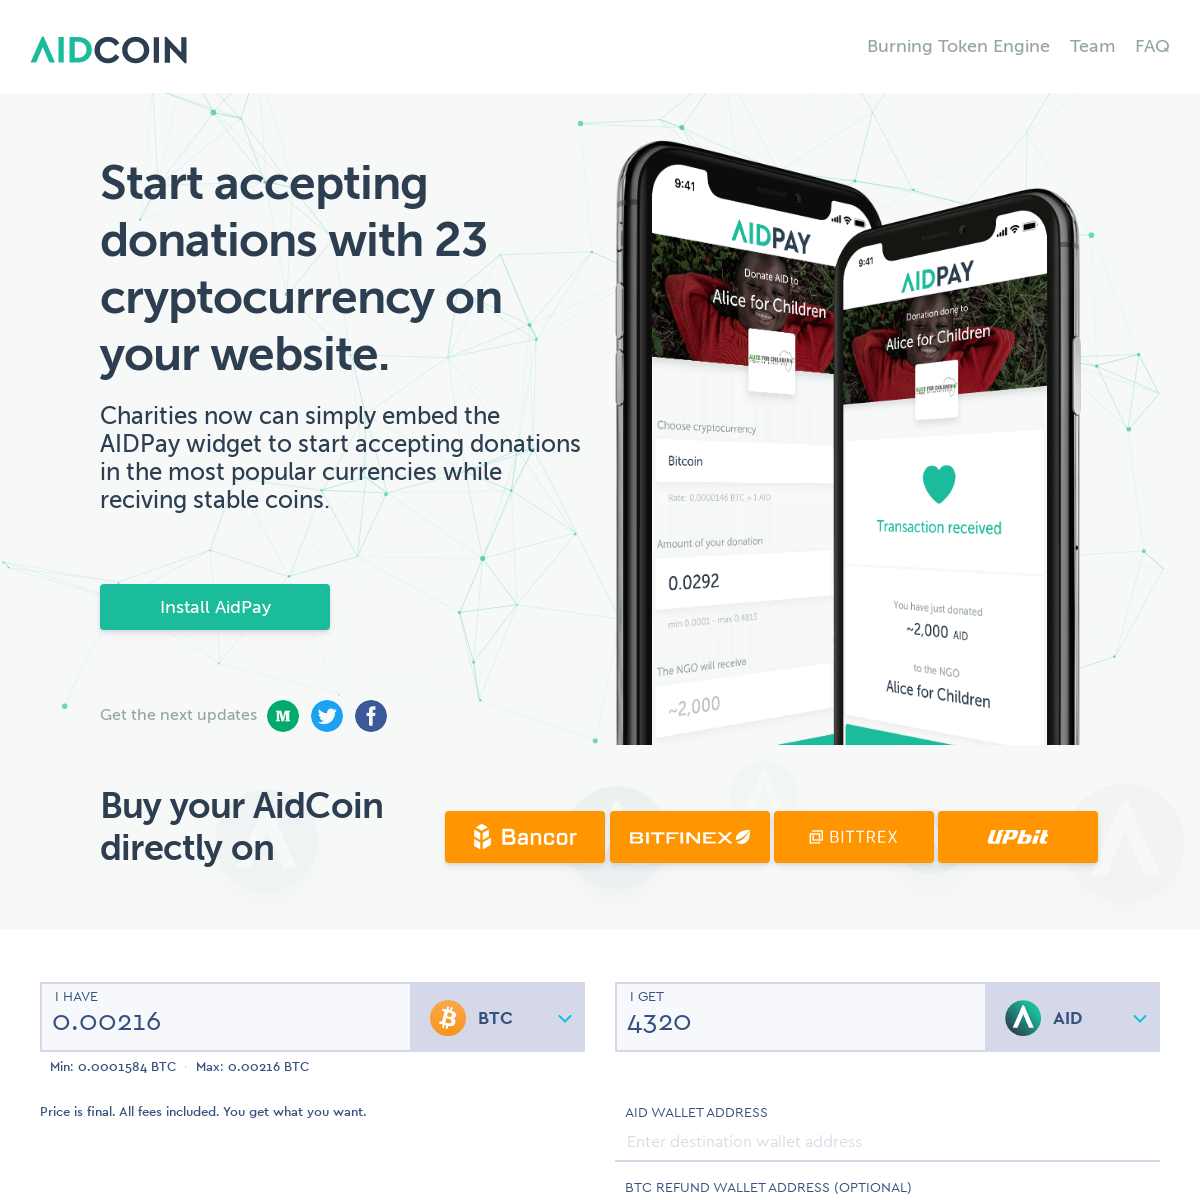 A complete backup of aidcoin.co